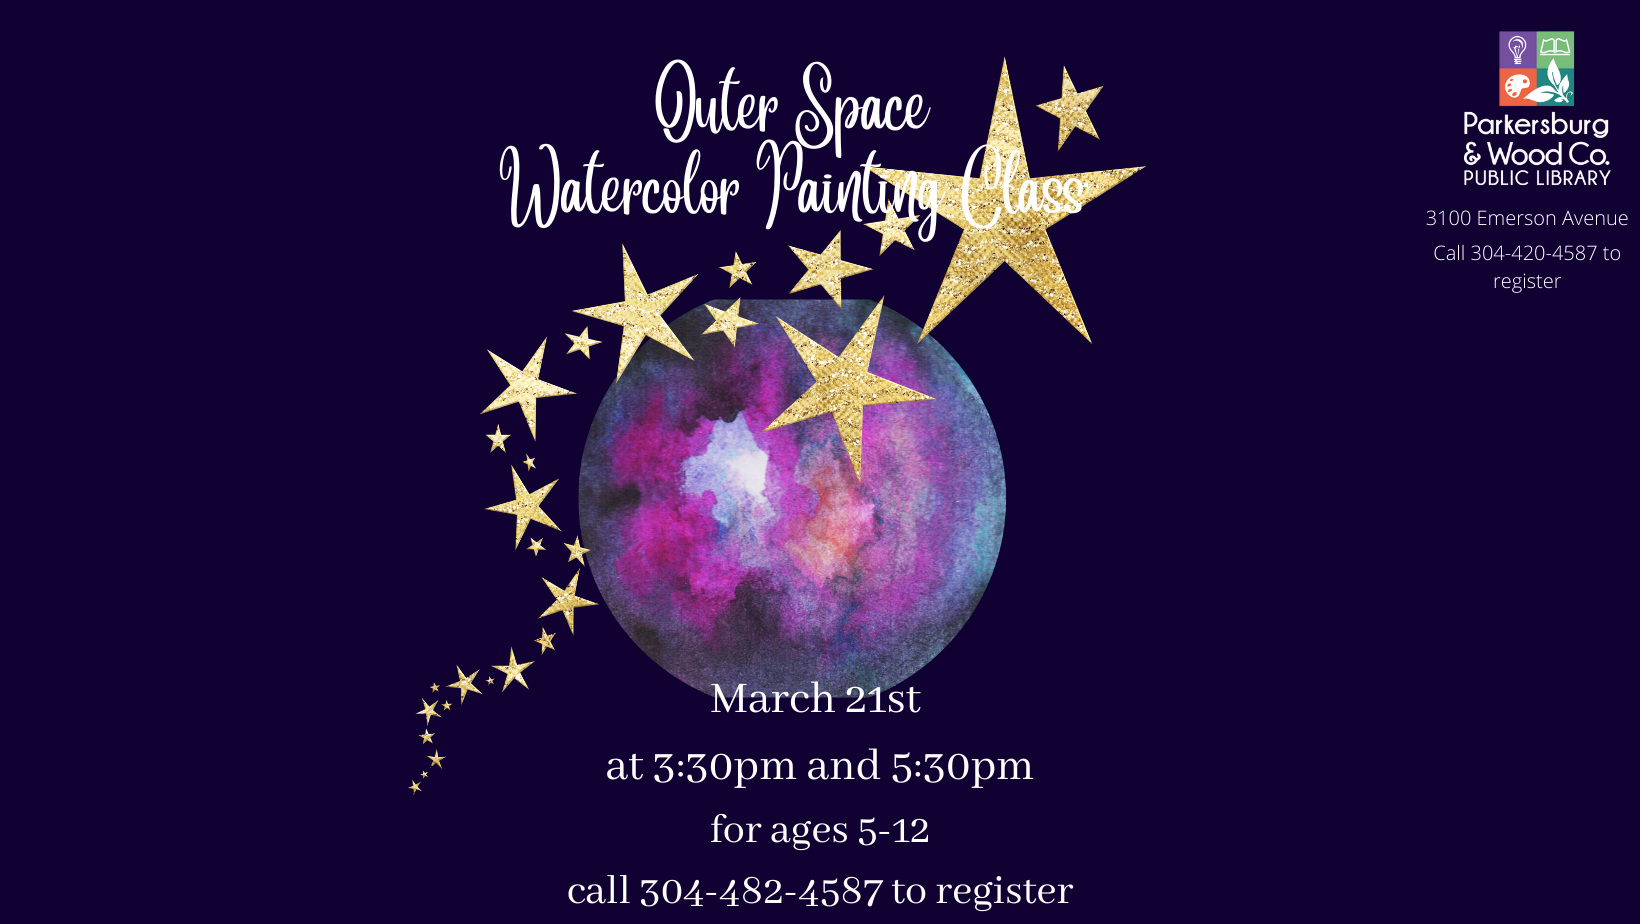 Outer Space Watercolor Painting Class at Emerson